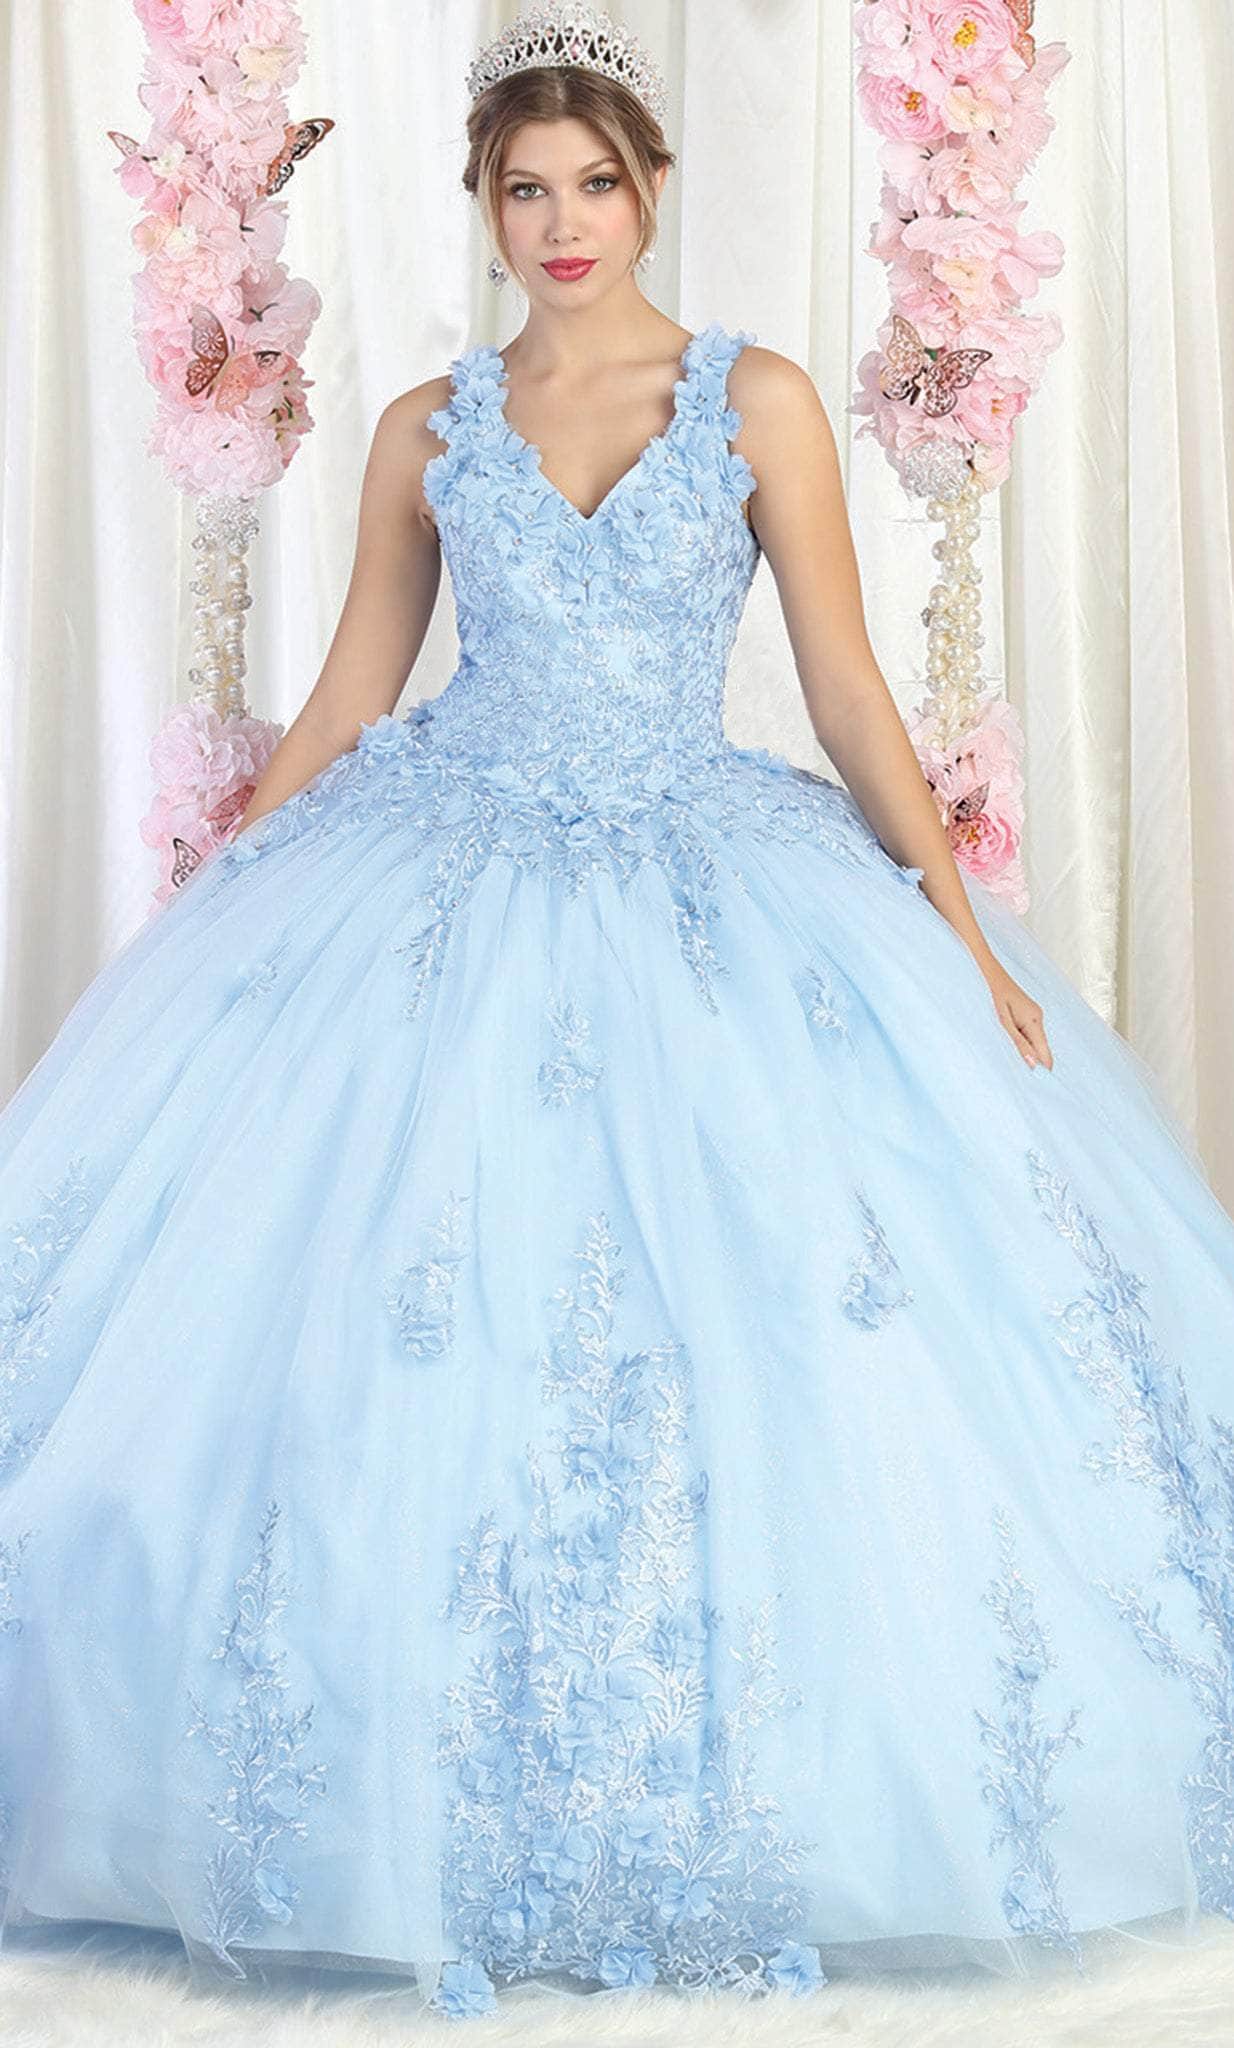 Image of May Queen LK195 - Floral Quinceanera Ballgown